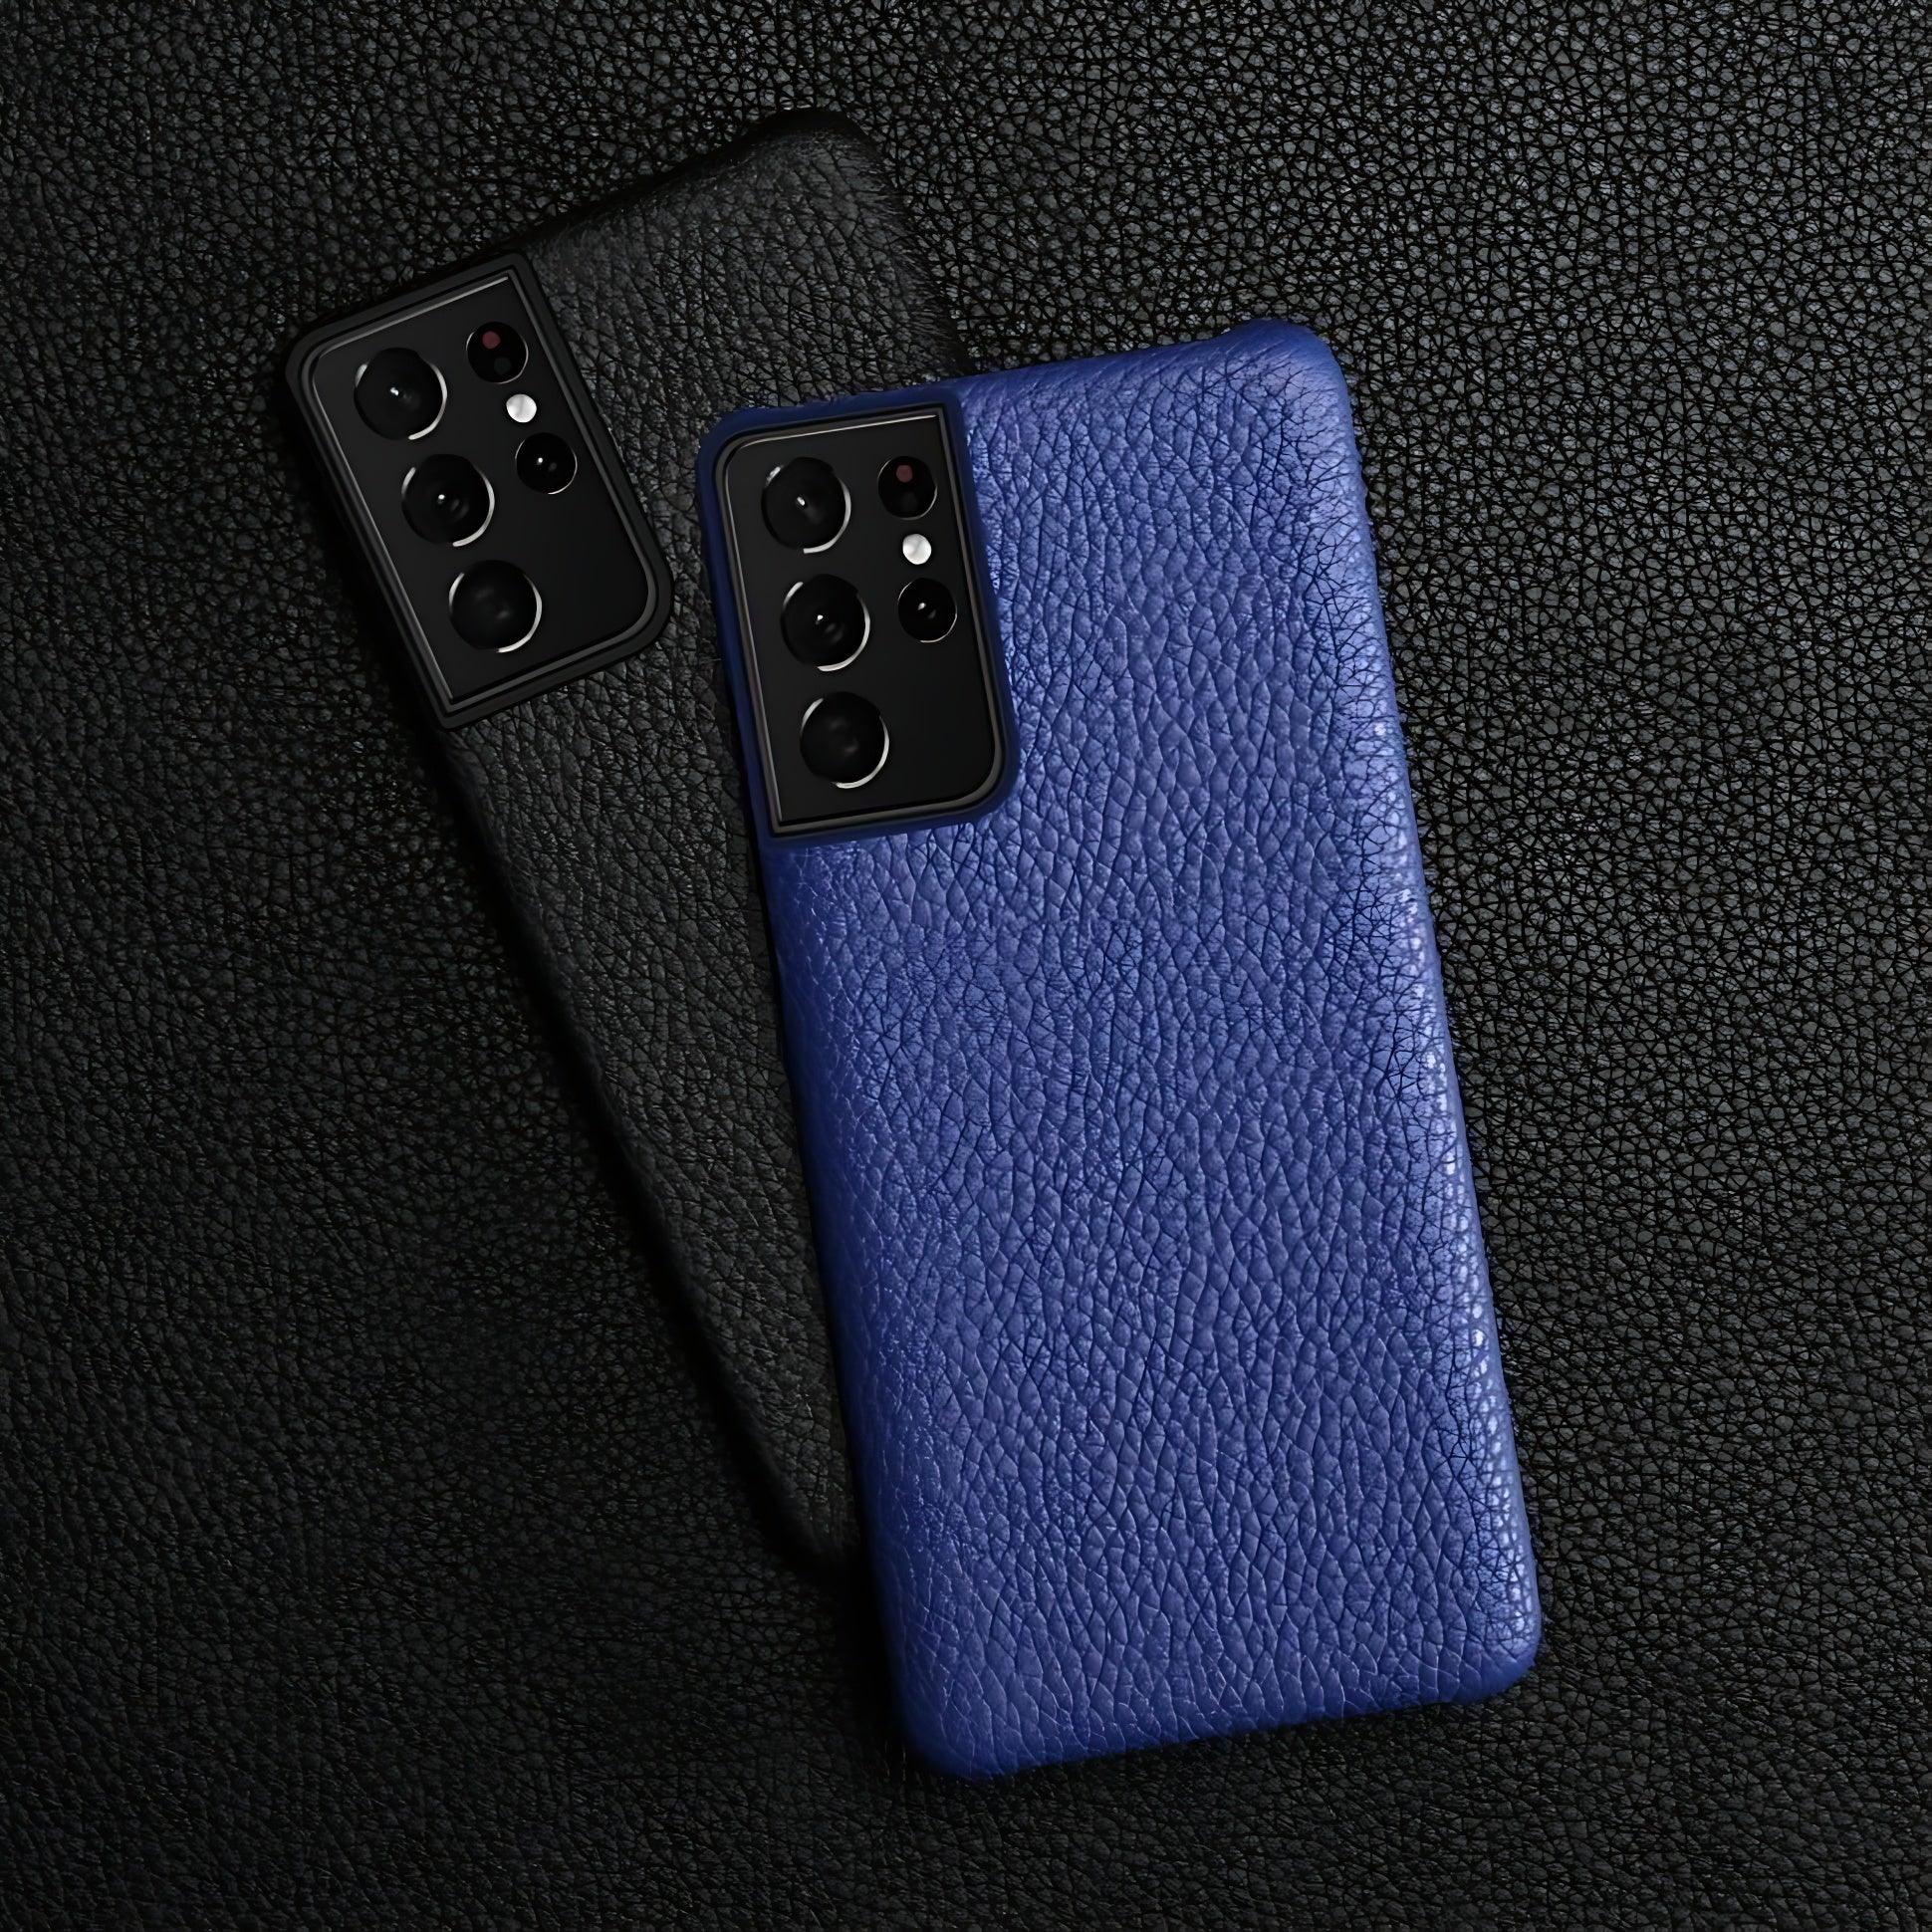 Cute Galaxy S10E Cases - Touchy Style .